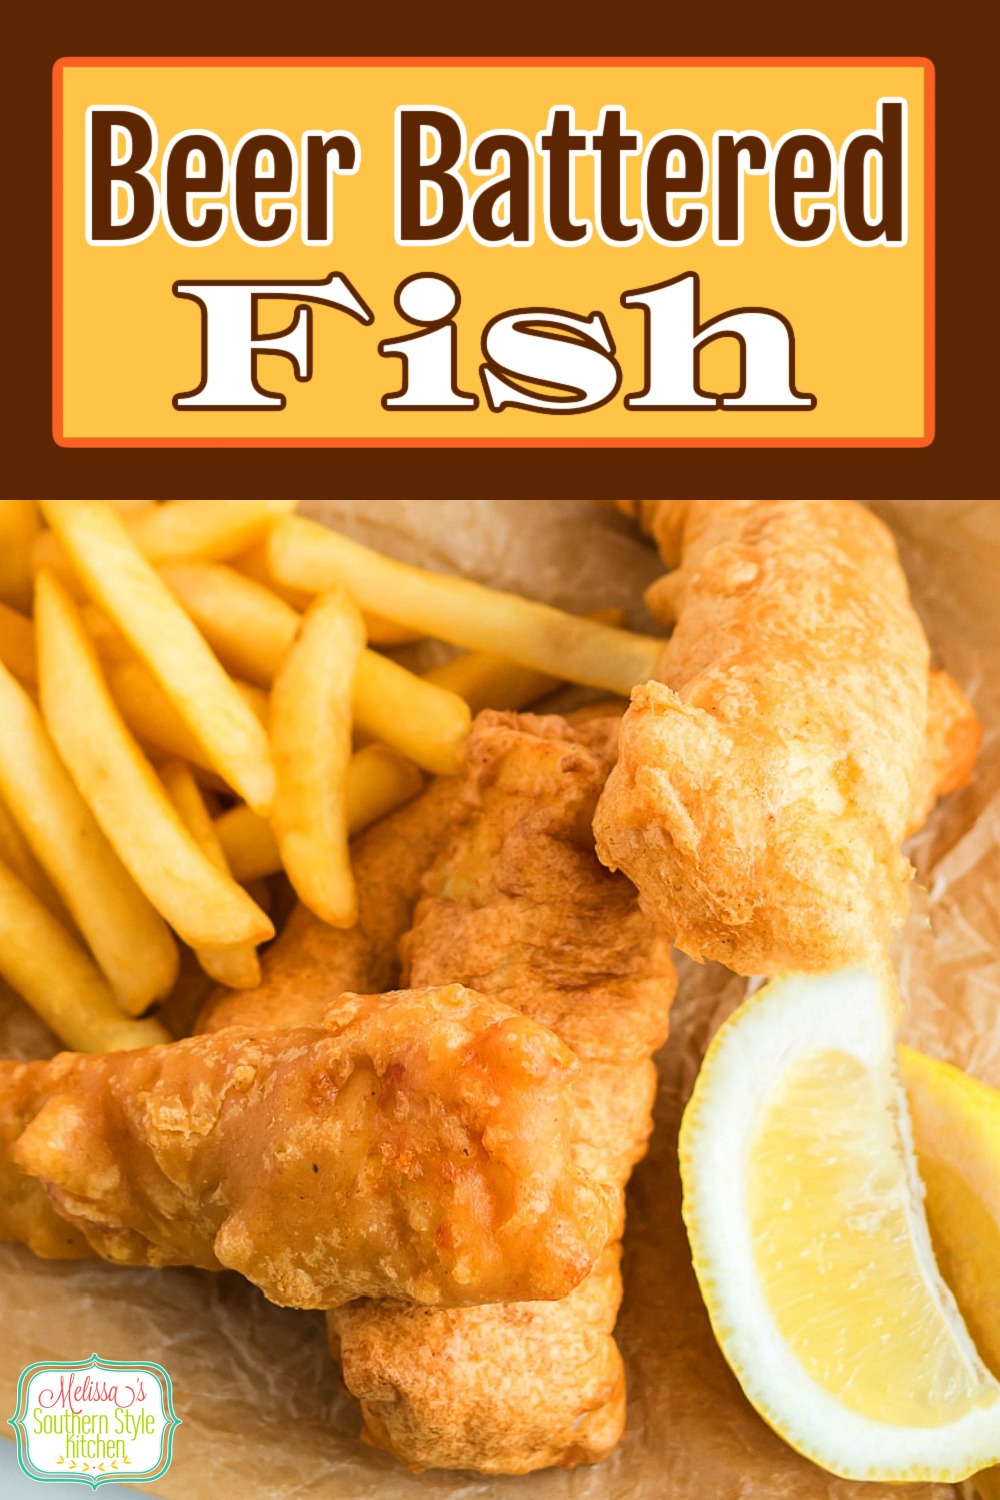 You'll create a fish and chips feast with this crispy golden Beer Battered Fish #beerbatteredfish #beerbatter #friedfish #cod #seafoodrecipes #bestbeerbatterrecipe #maindish #dinnerideas #southernfood #southernrecipes via @melissasssk